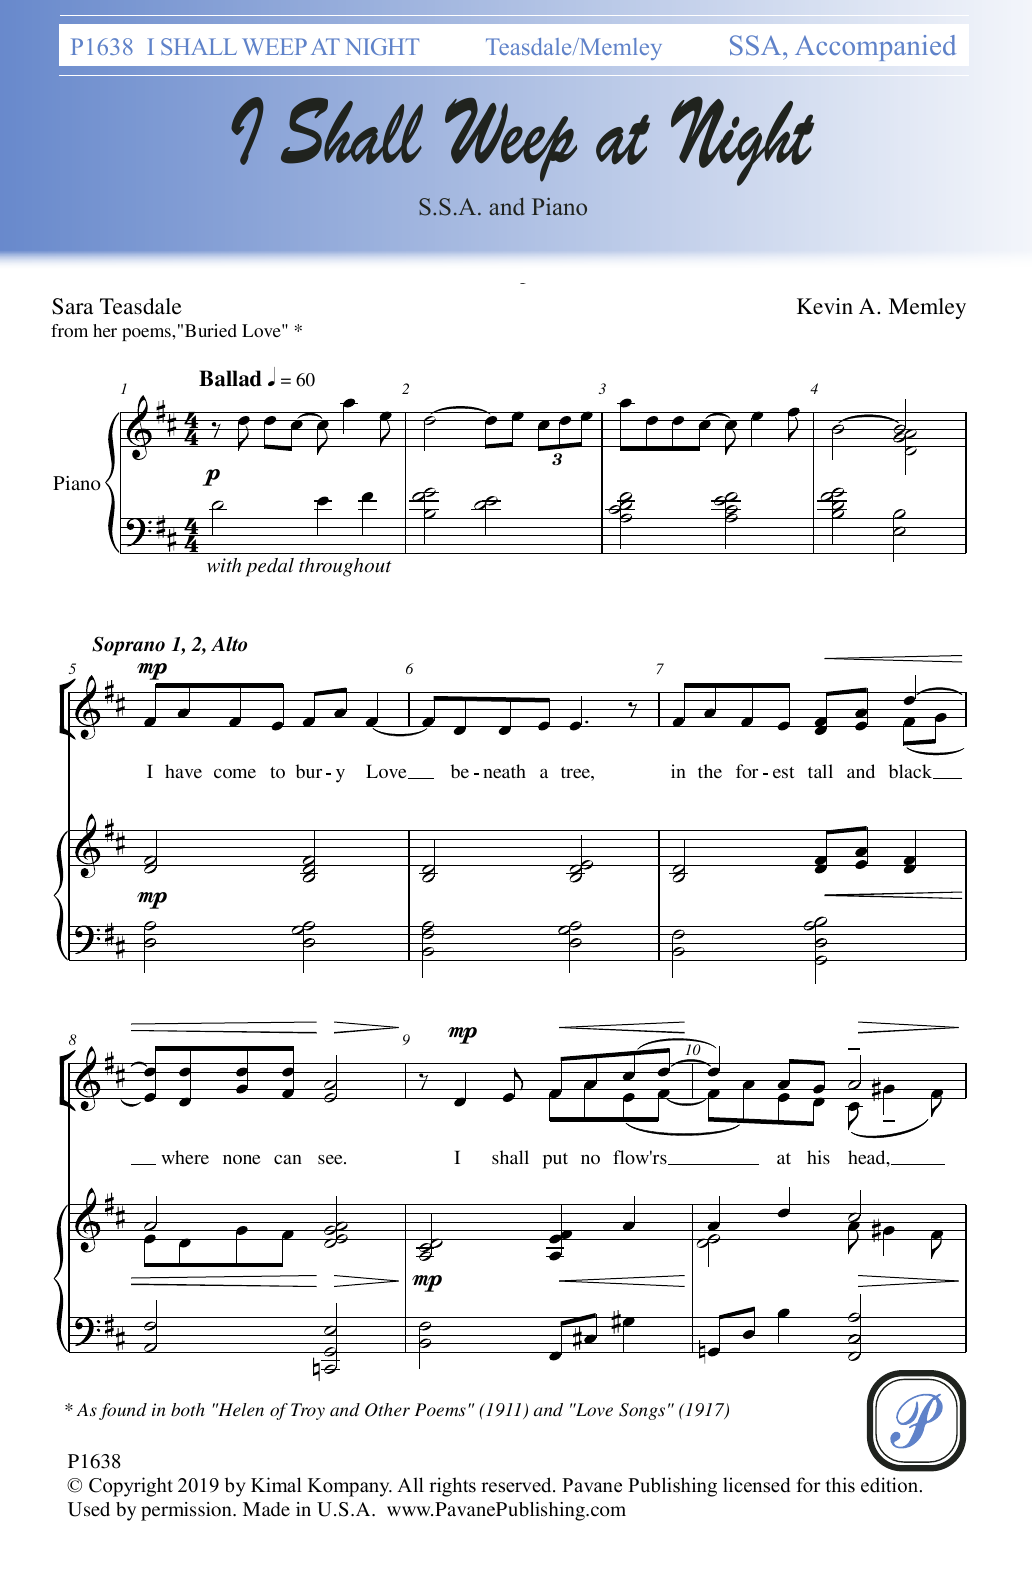 Download Sara Teasdale and Kevin A. Memley I Shall Weep at Night Sheet Music